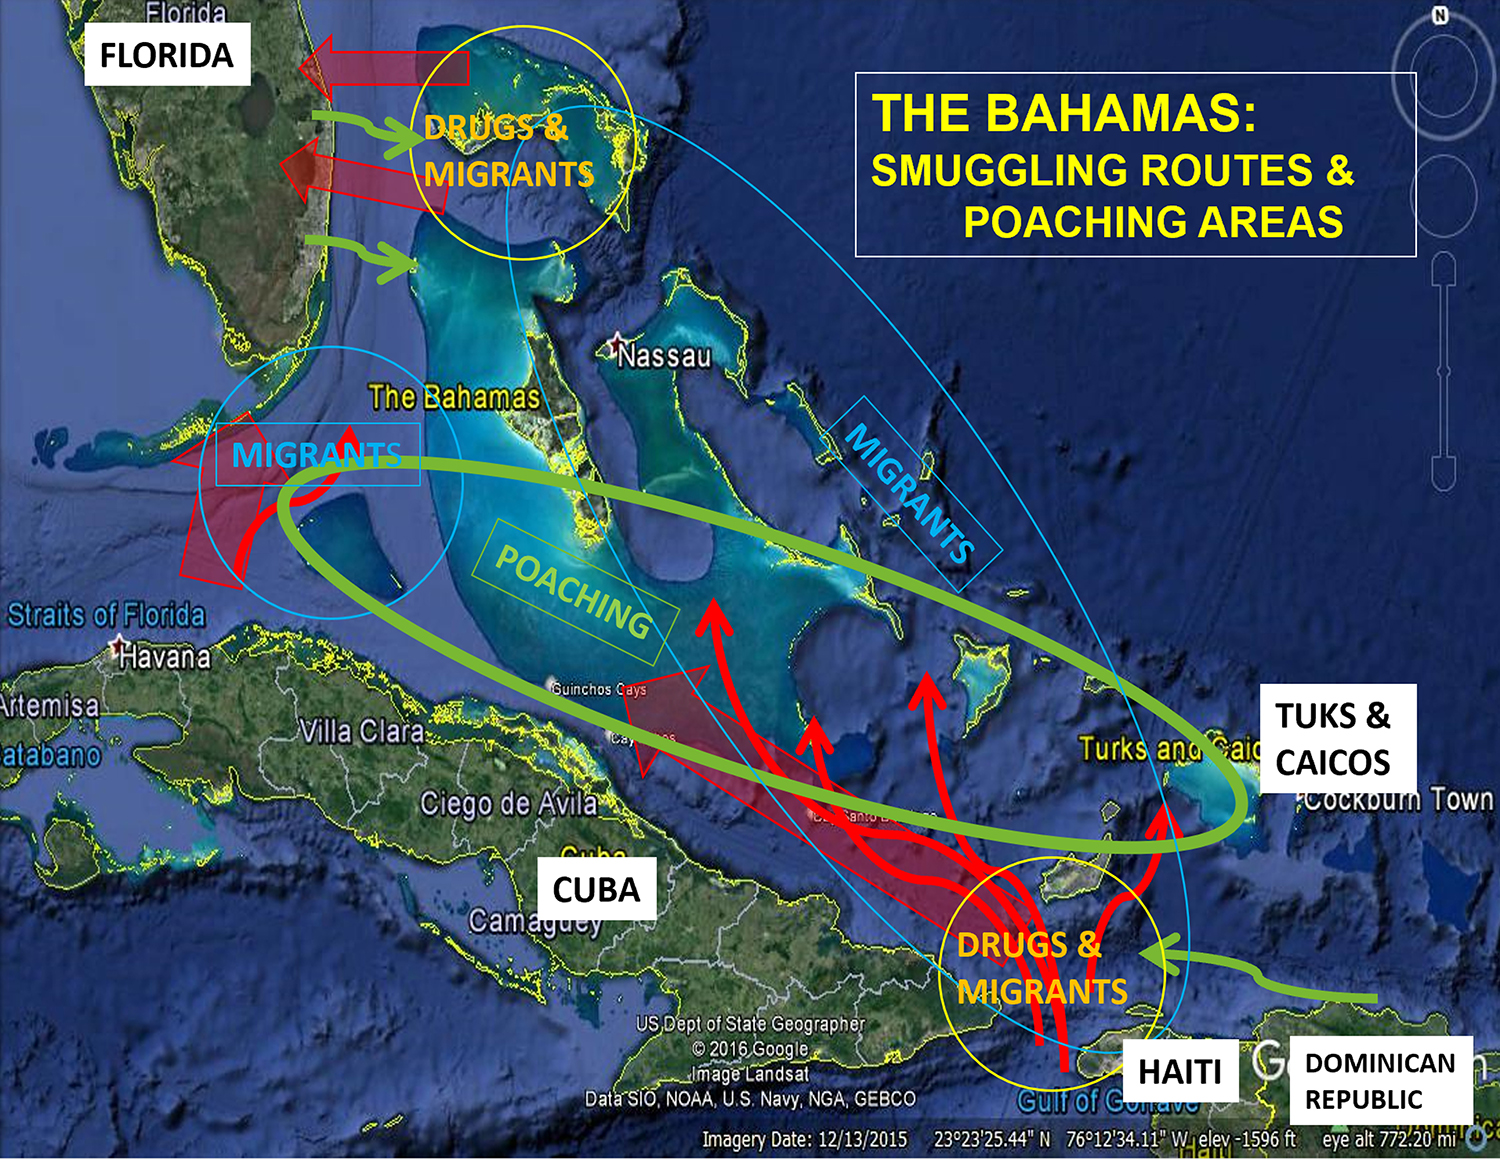 RBDF STRATEGY FOR ADDRESSING HUMAN SMUGGLING IN THE BAHAMAS